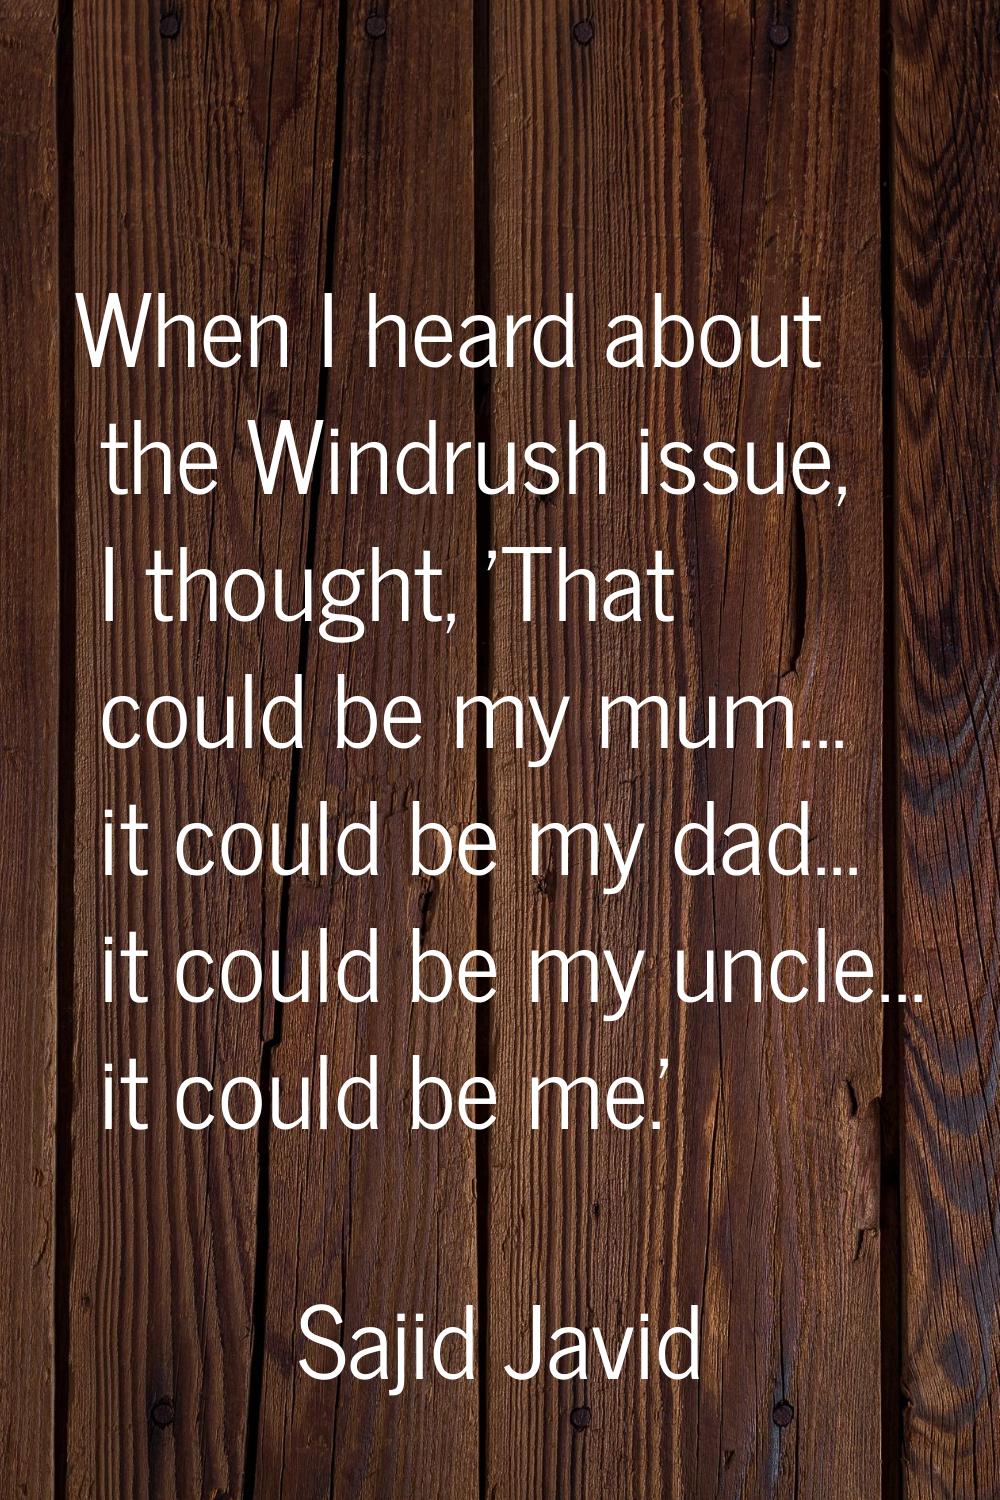 When I heard about the Windrush issue, I thought, 'That could be my mum... it could be my dad... it